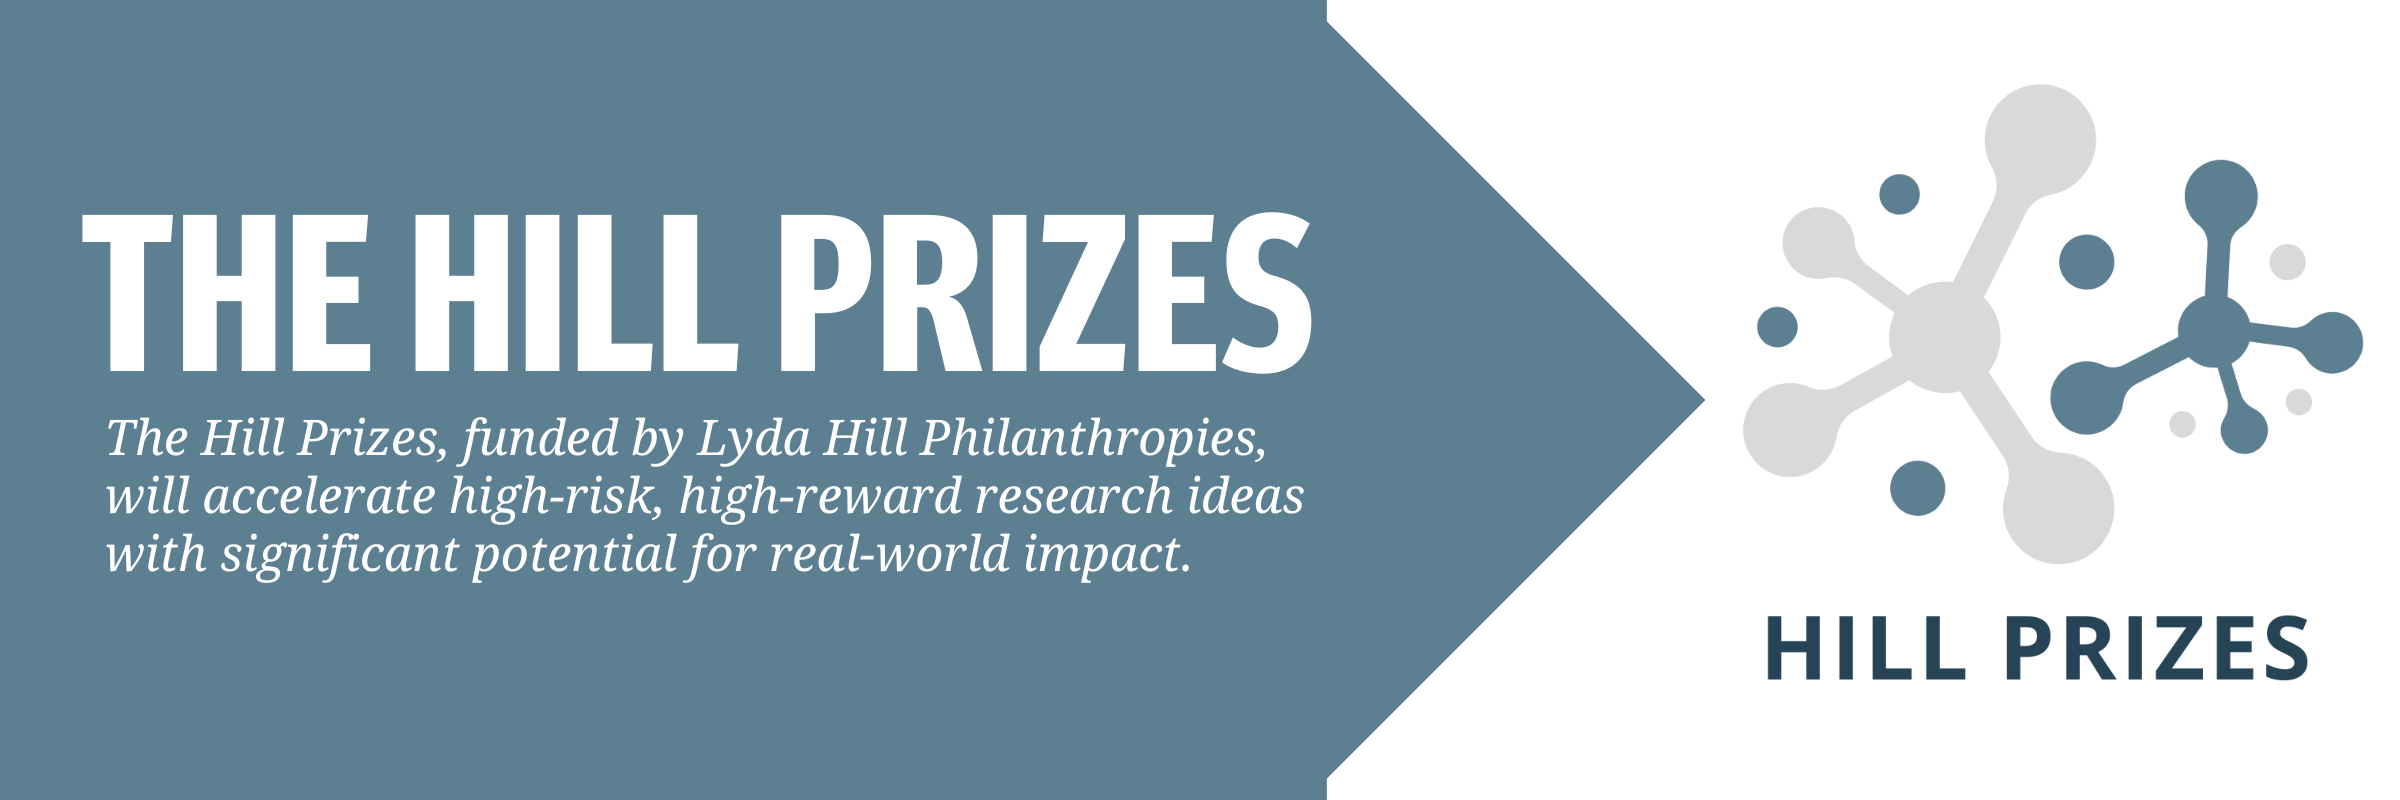 Hill Prizes